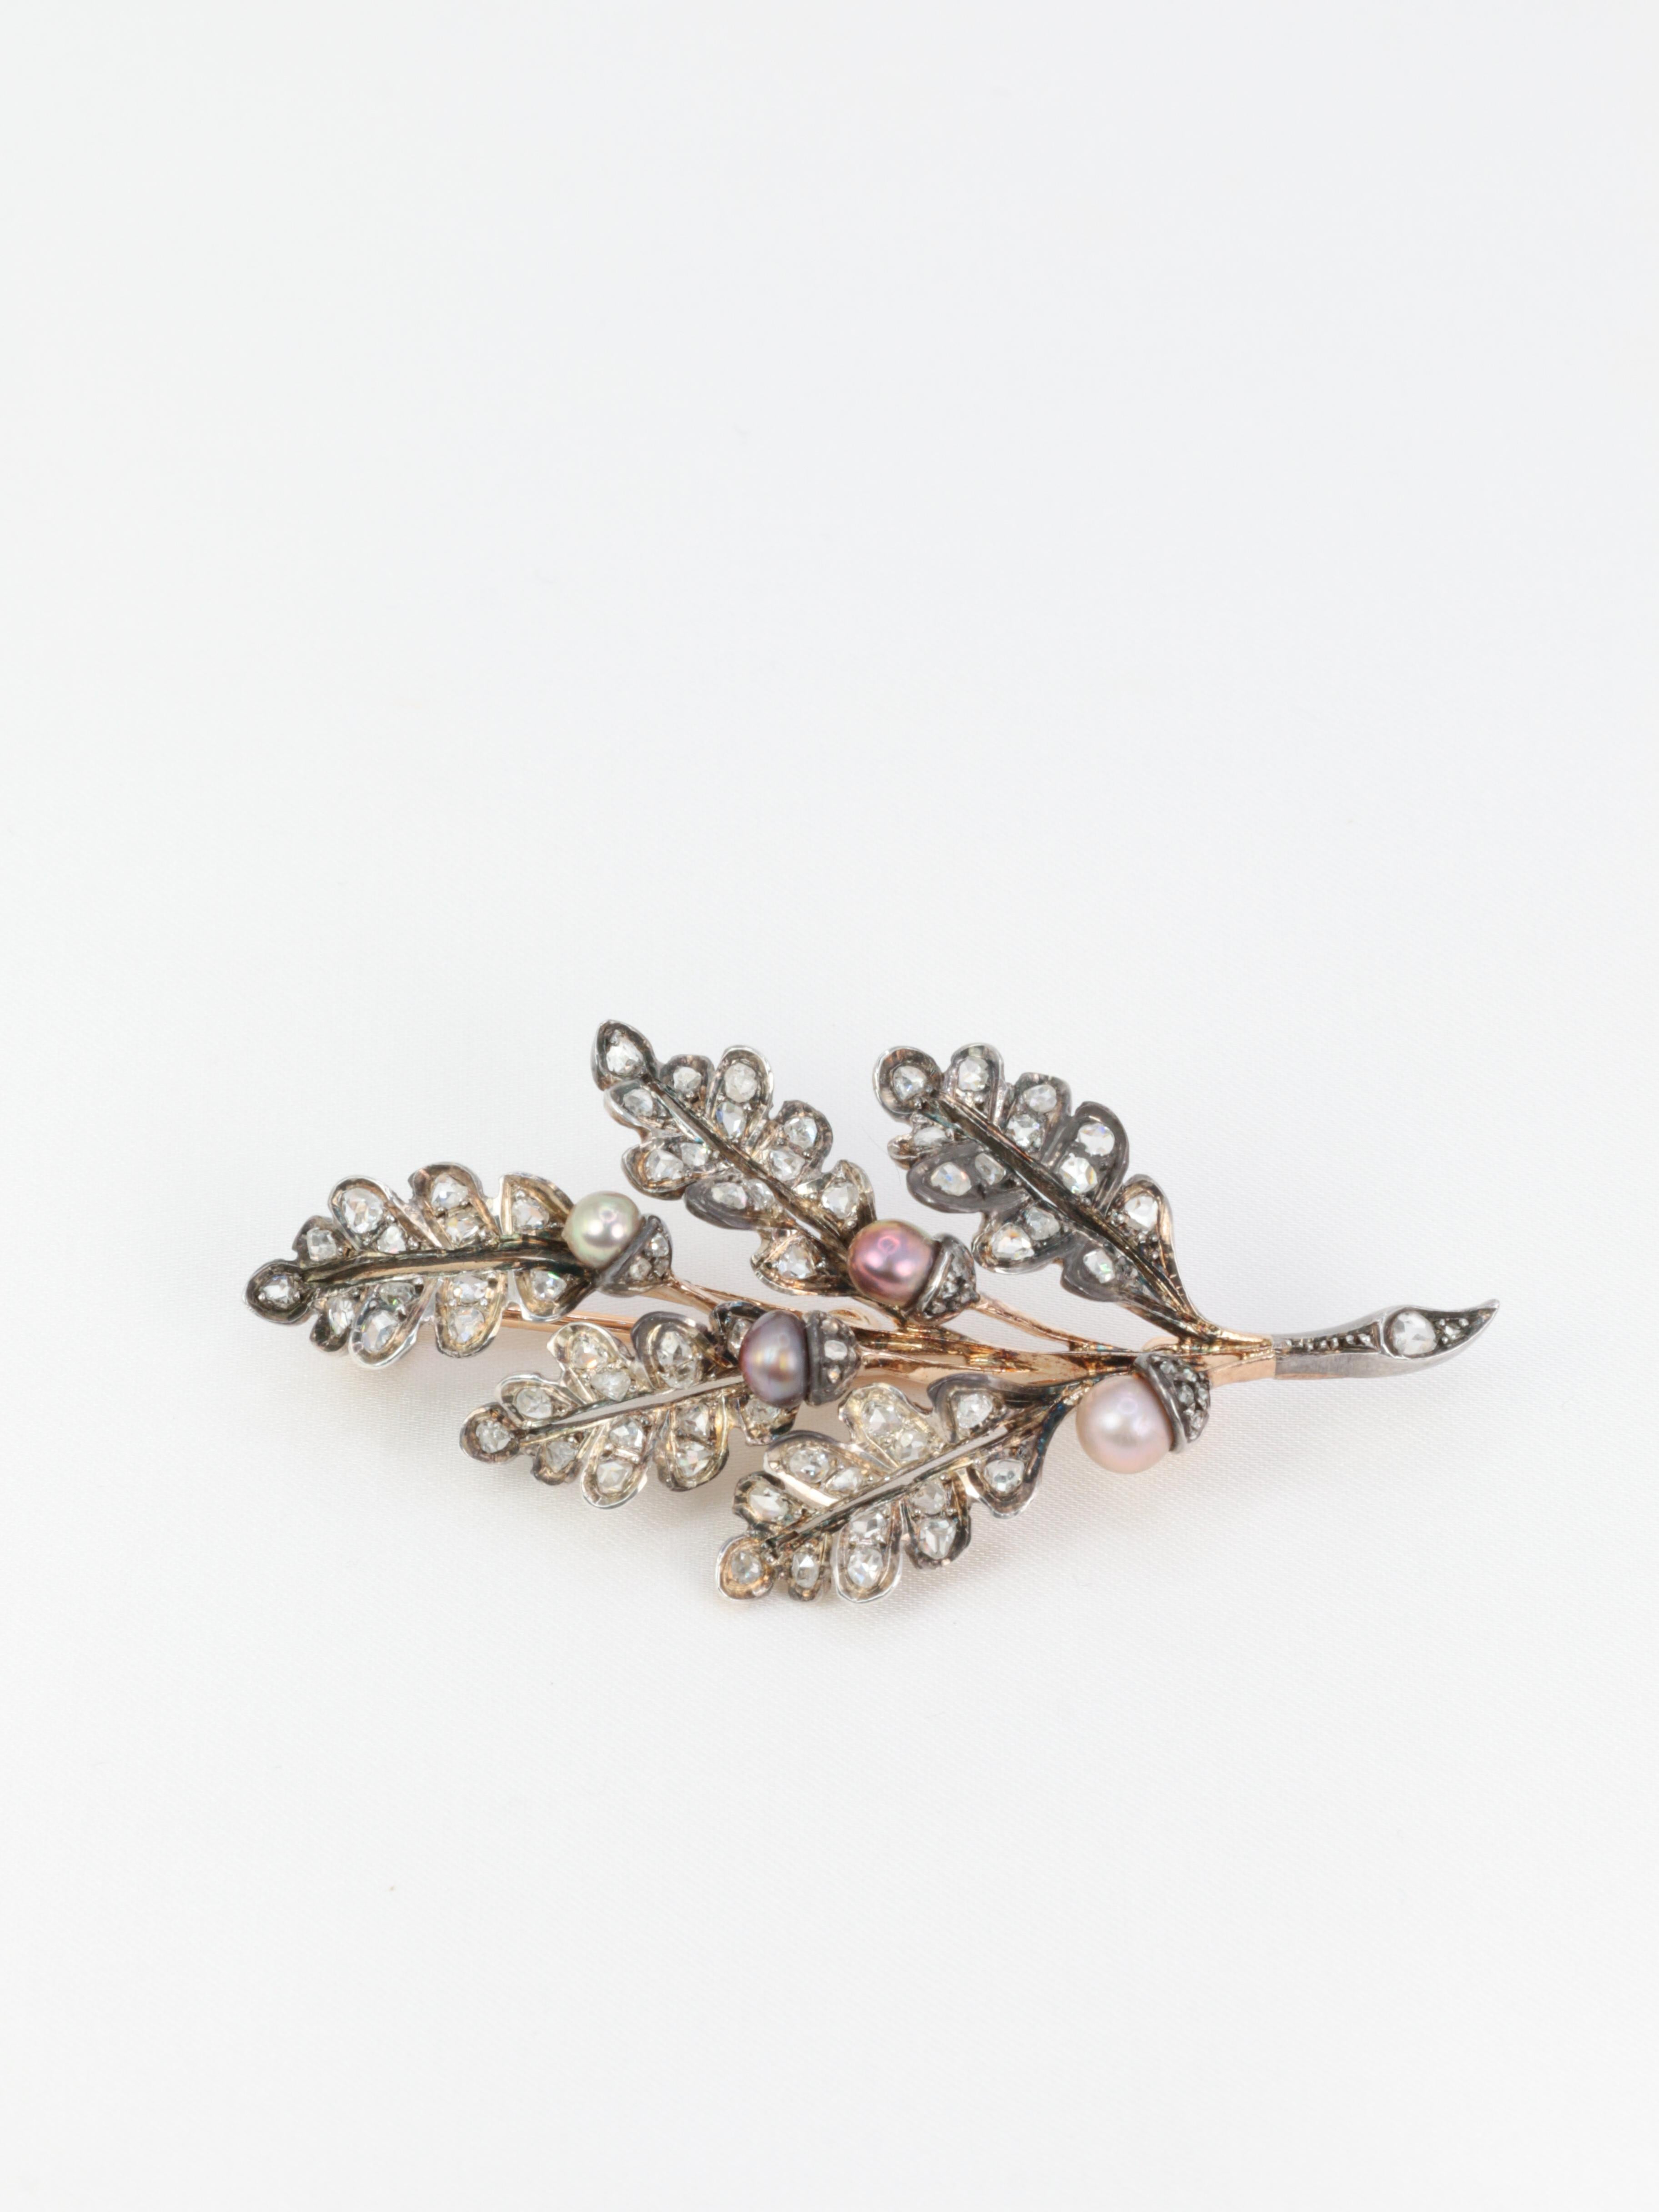 Victorian Gold, Silver, Natural Pearls and Rose-Cut Diamond Leaf Brooch, circa 1